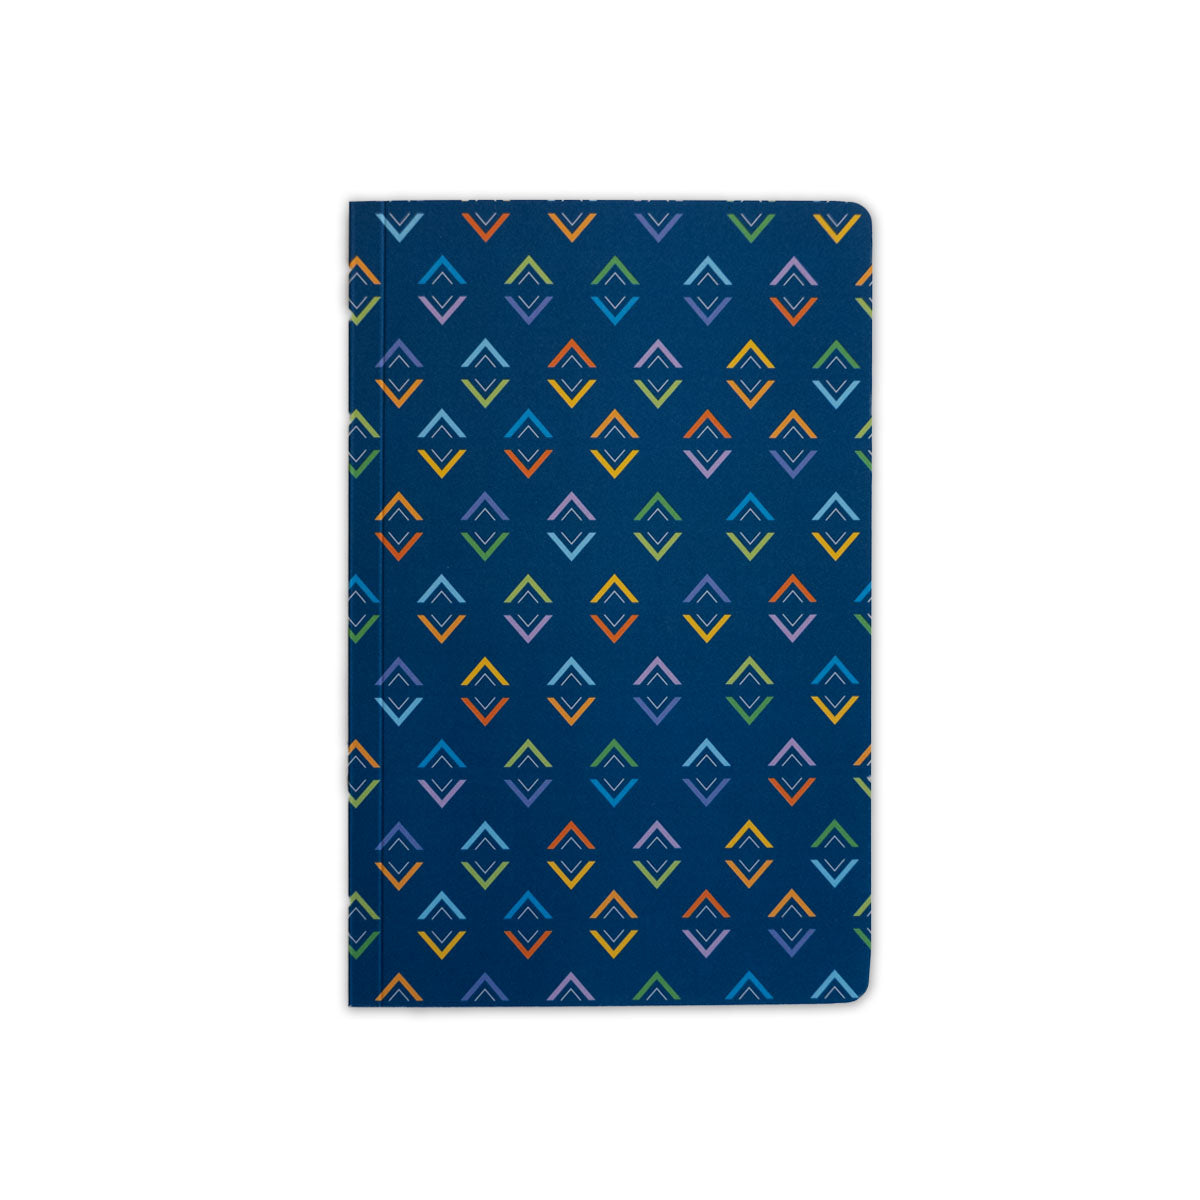 5" x 8.25" soft cover navy notebook with up and down triangles in george brown college colours (green, orange, yellow, blue, purple)